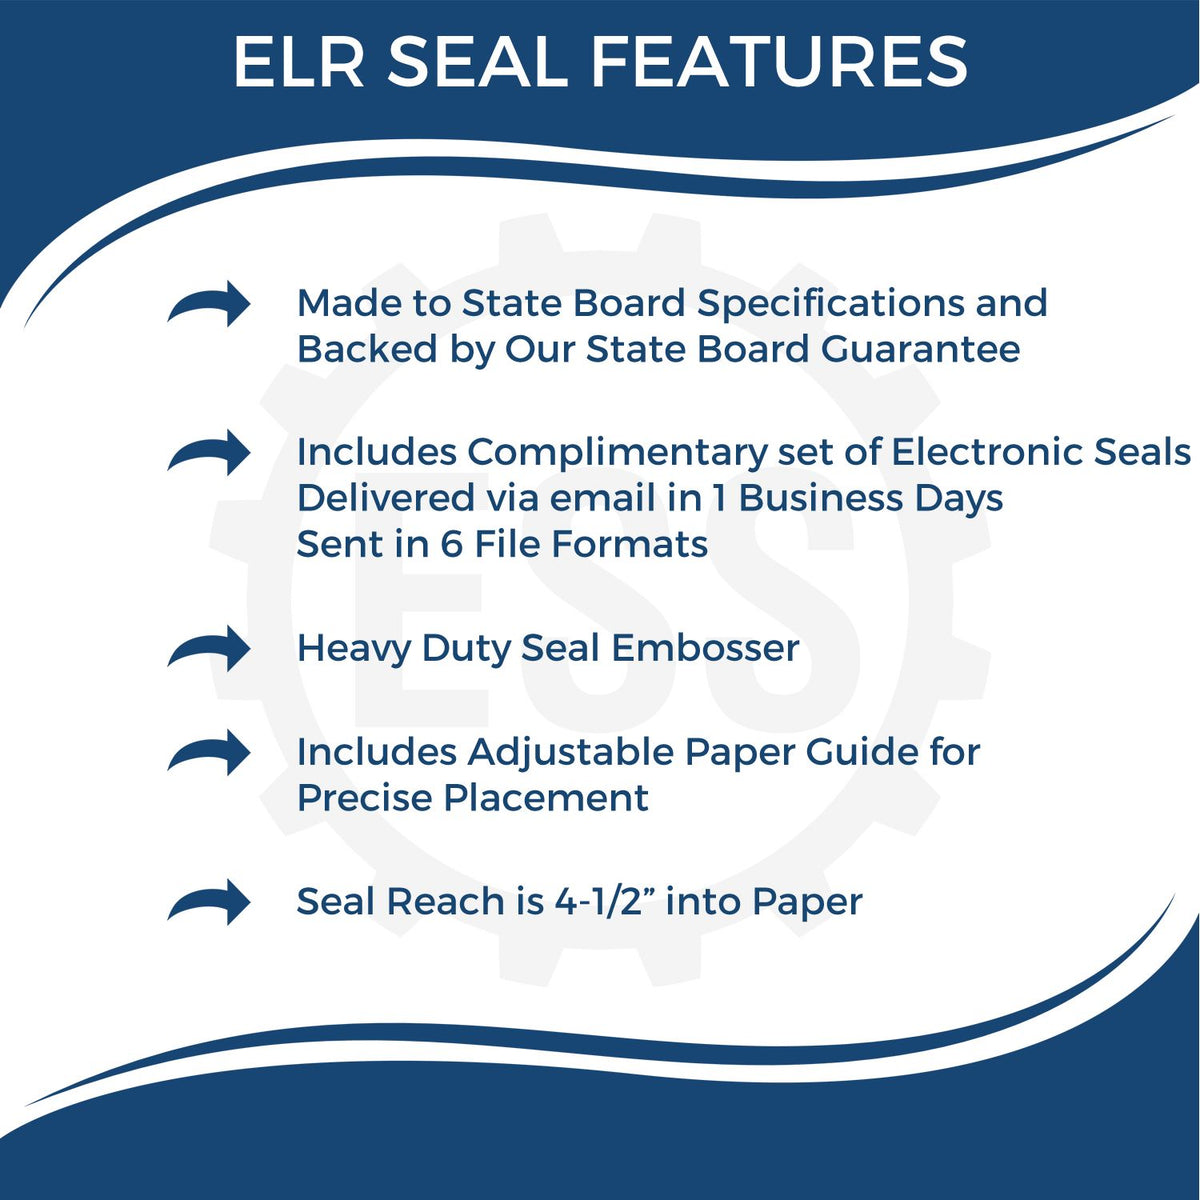 A picture of an infographic highlighting the selling points for the State of New Hampshire Extended Long Reach Engineer Seal